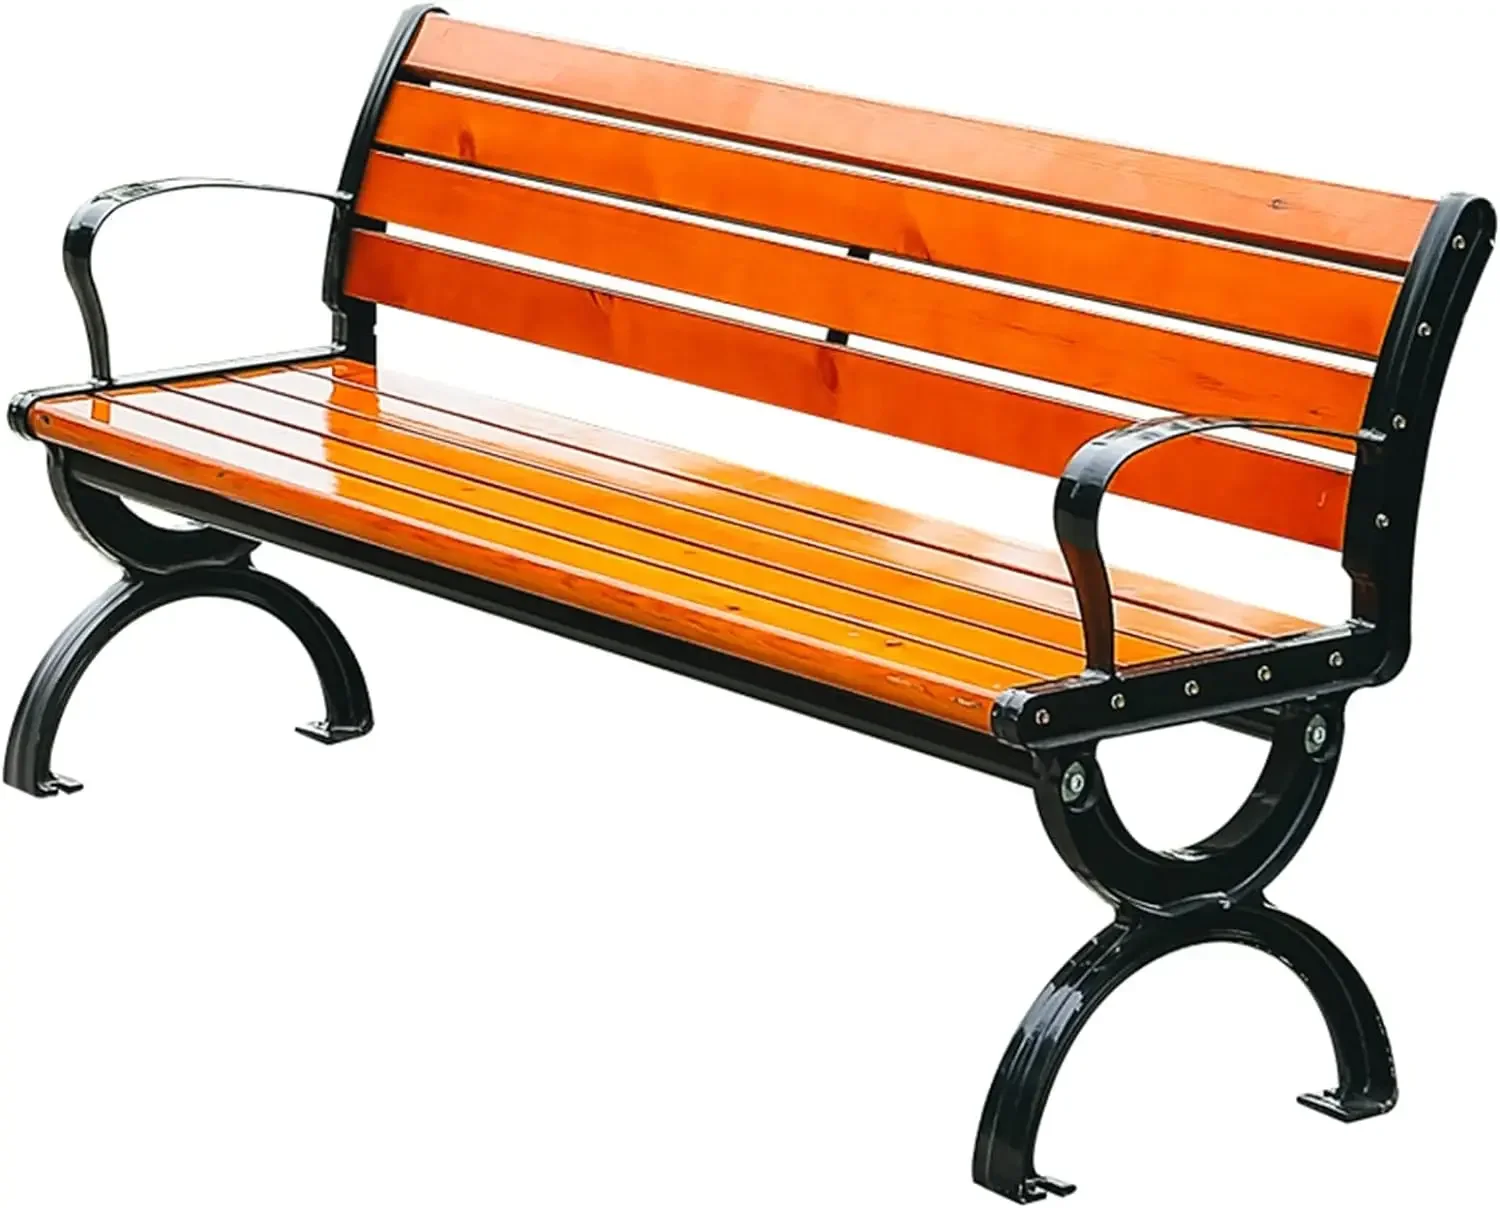 

Outdoor Benches Cast Aluminum Preservative Wood 67IN(170CM) Patio Garden Bench Perfect for Backyard, Lawn, Porch, Path